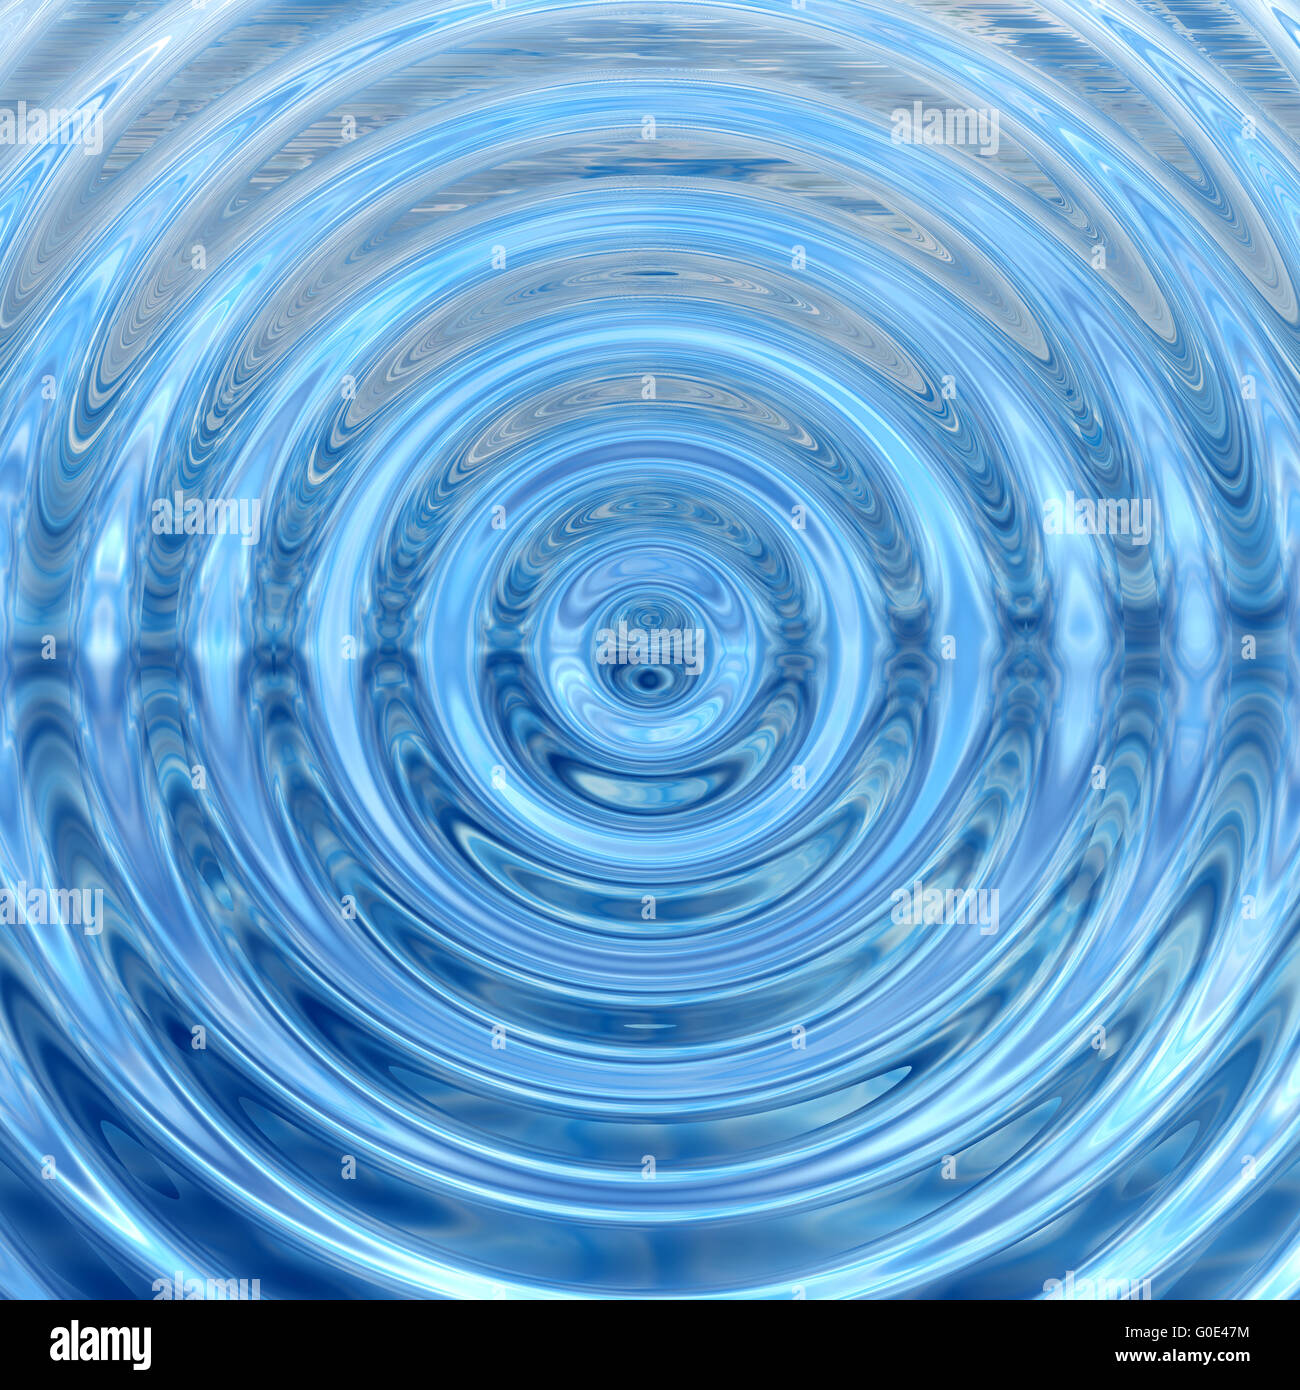 Abstract Waves of Water Ripples Background Stock Photo